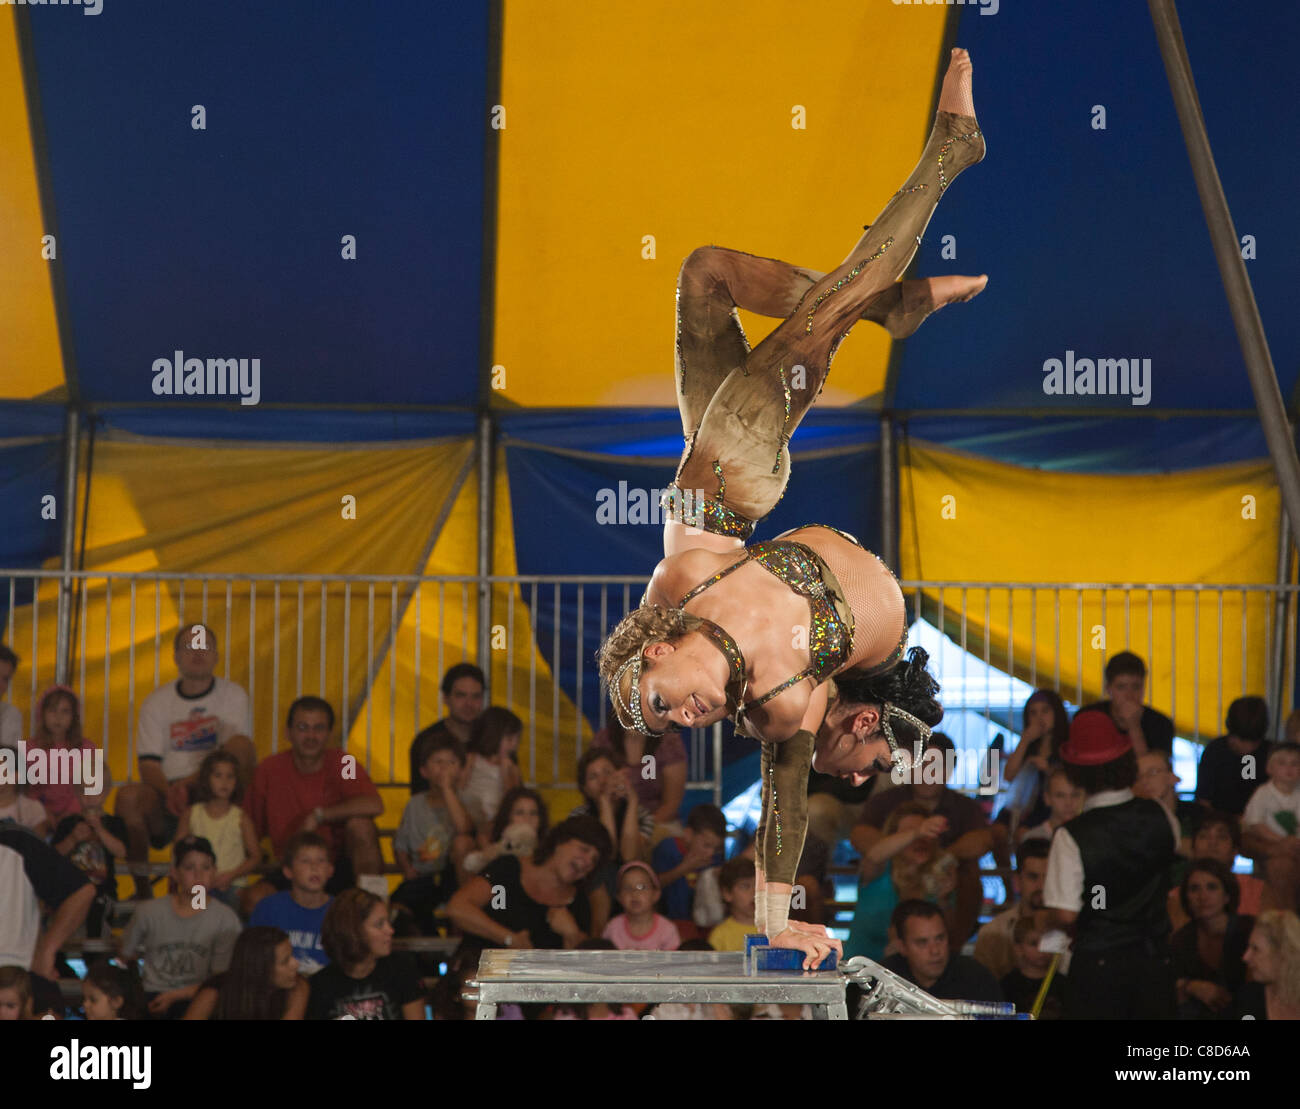 Acrobat performing in a circus tent Stock Photo